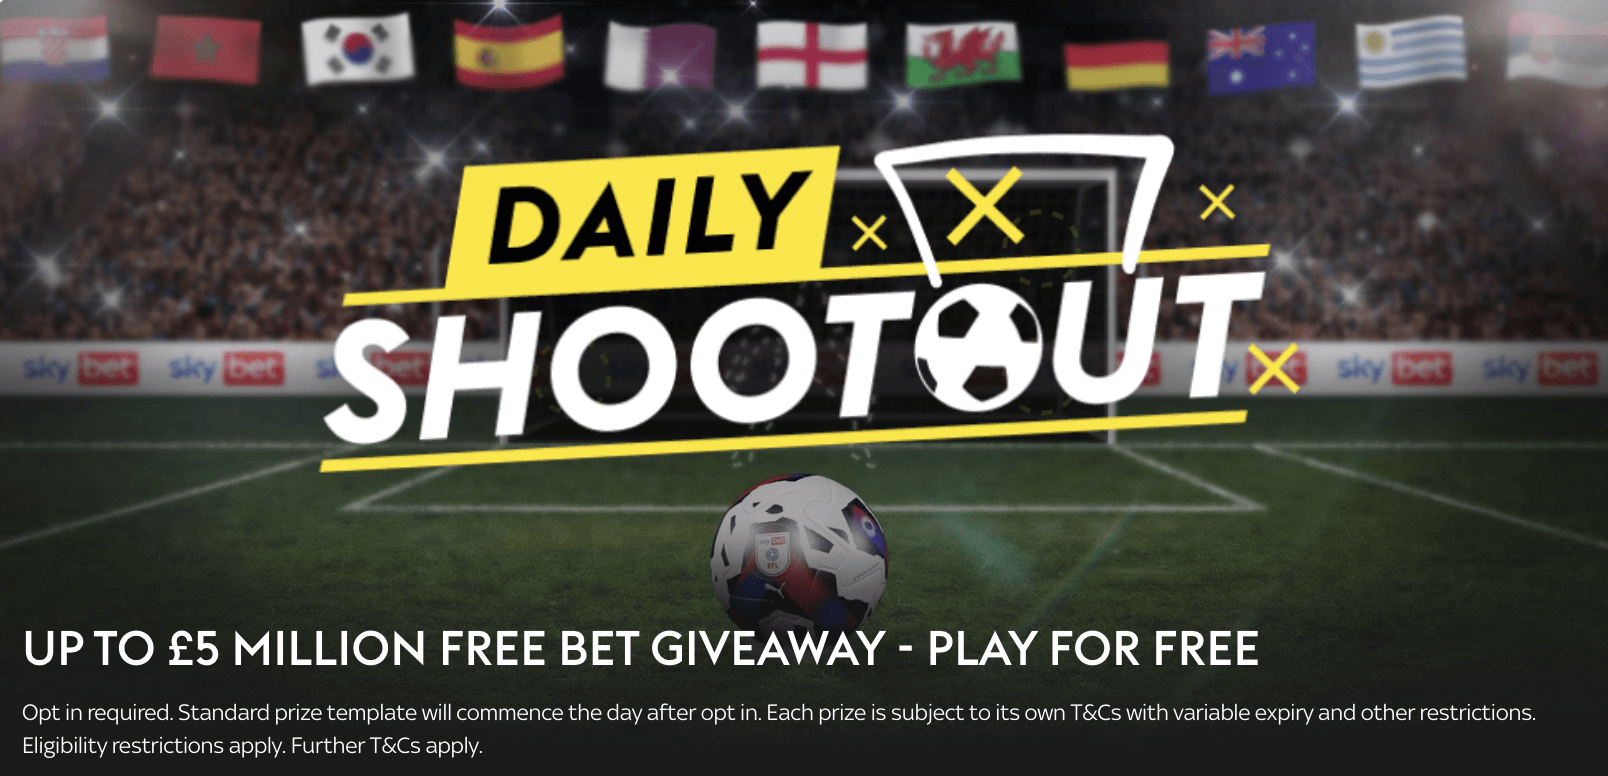 bet365 Goals Giveaway: Free To Play Football Game, Chance To Win Free Bets  Every Week